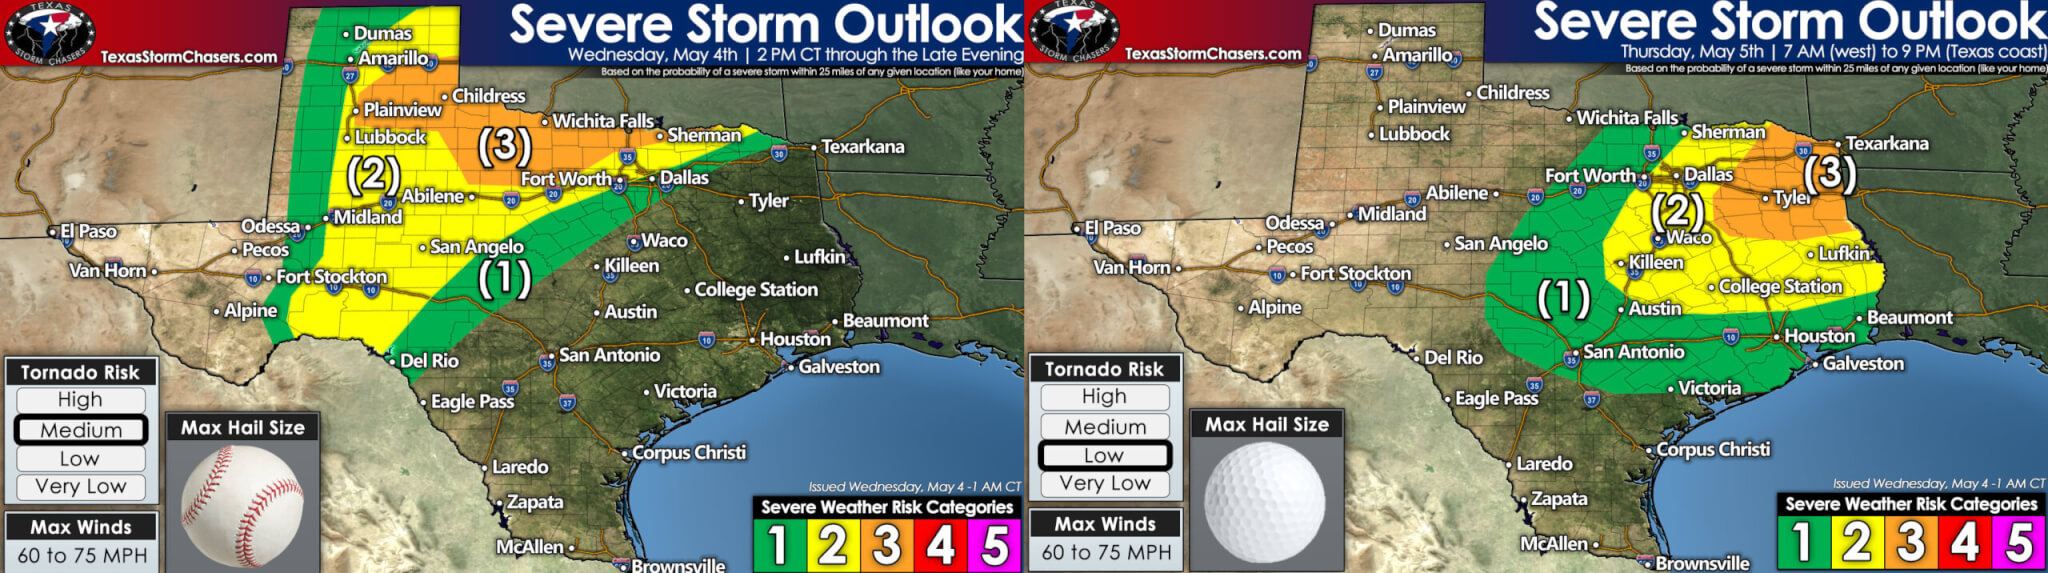 More Texas Severe Storms Expected – Today & Thursday